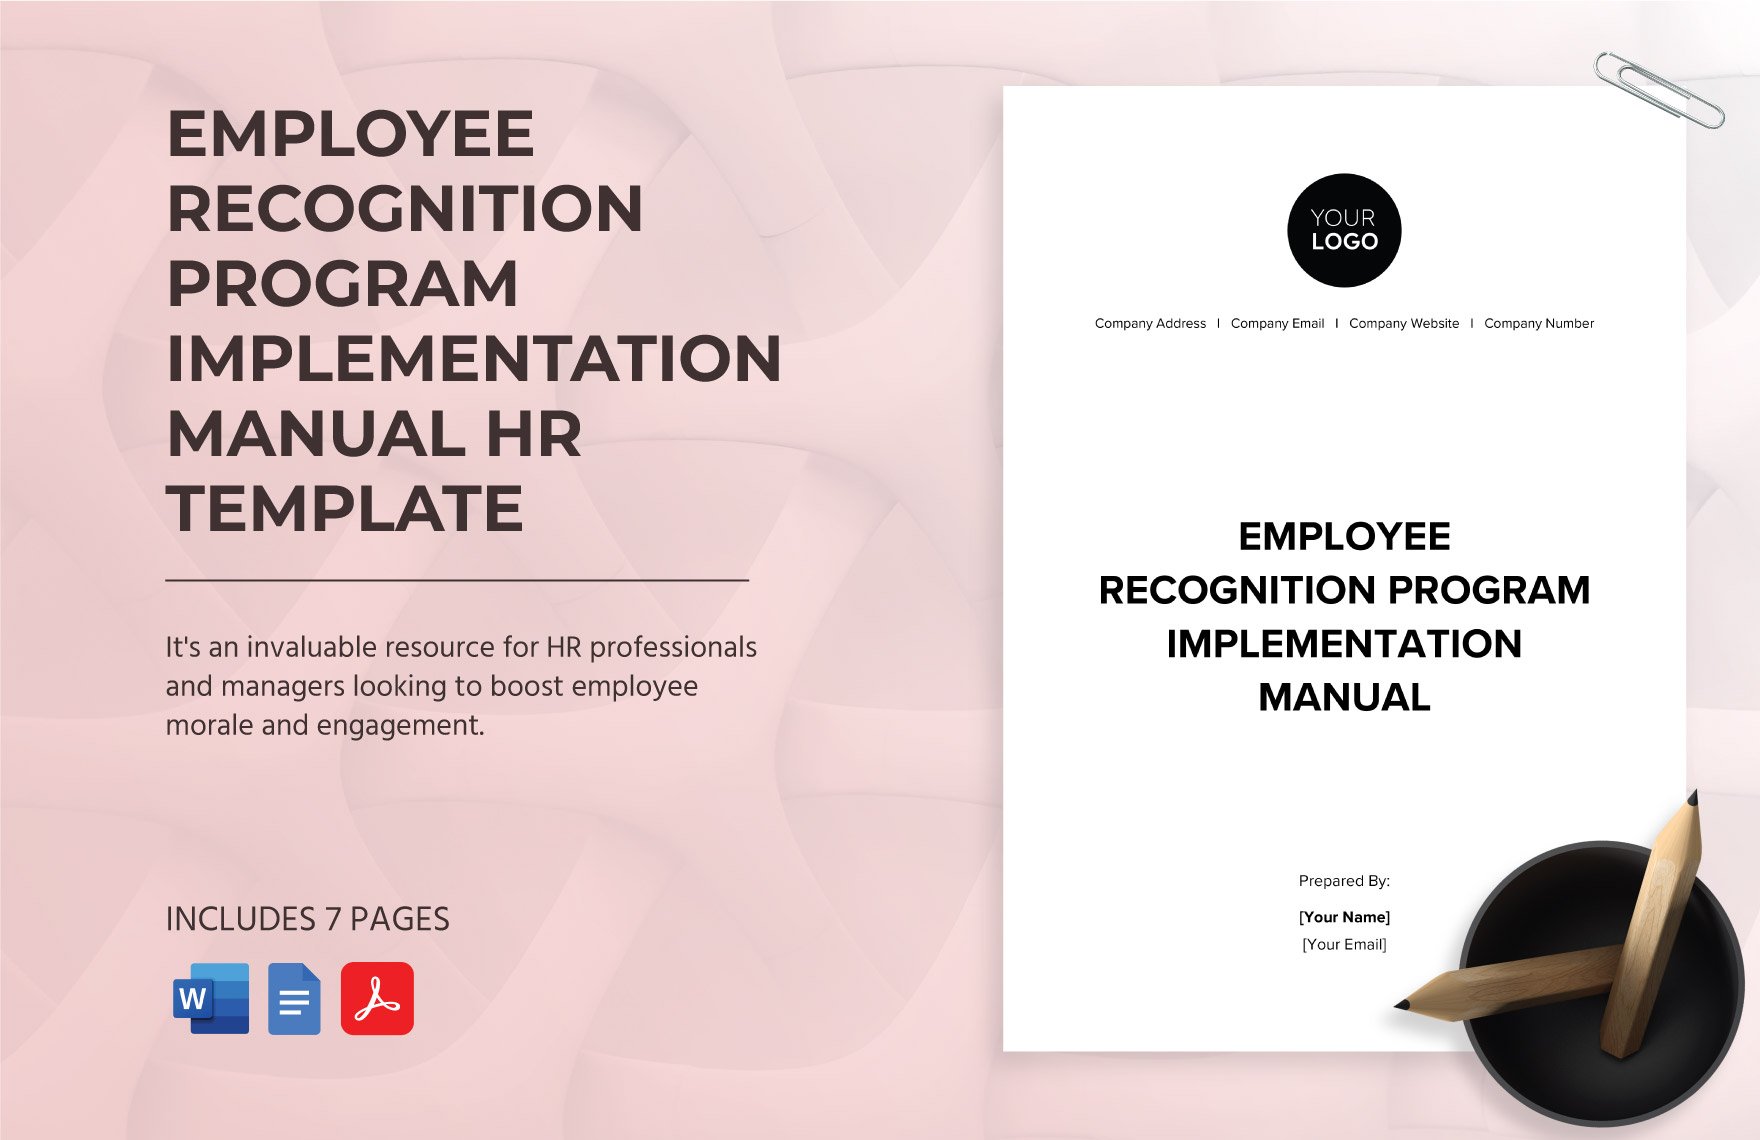 Employee Recognition Program Implementation Manual HR Template in Word, Google Docs, PDF